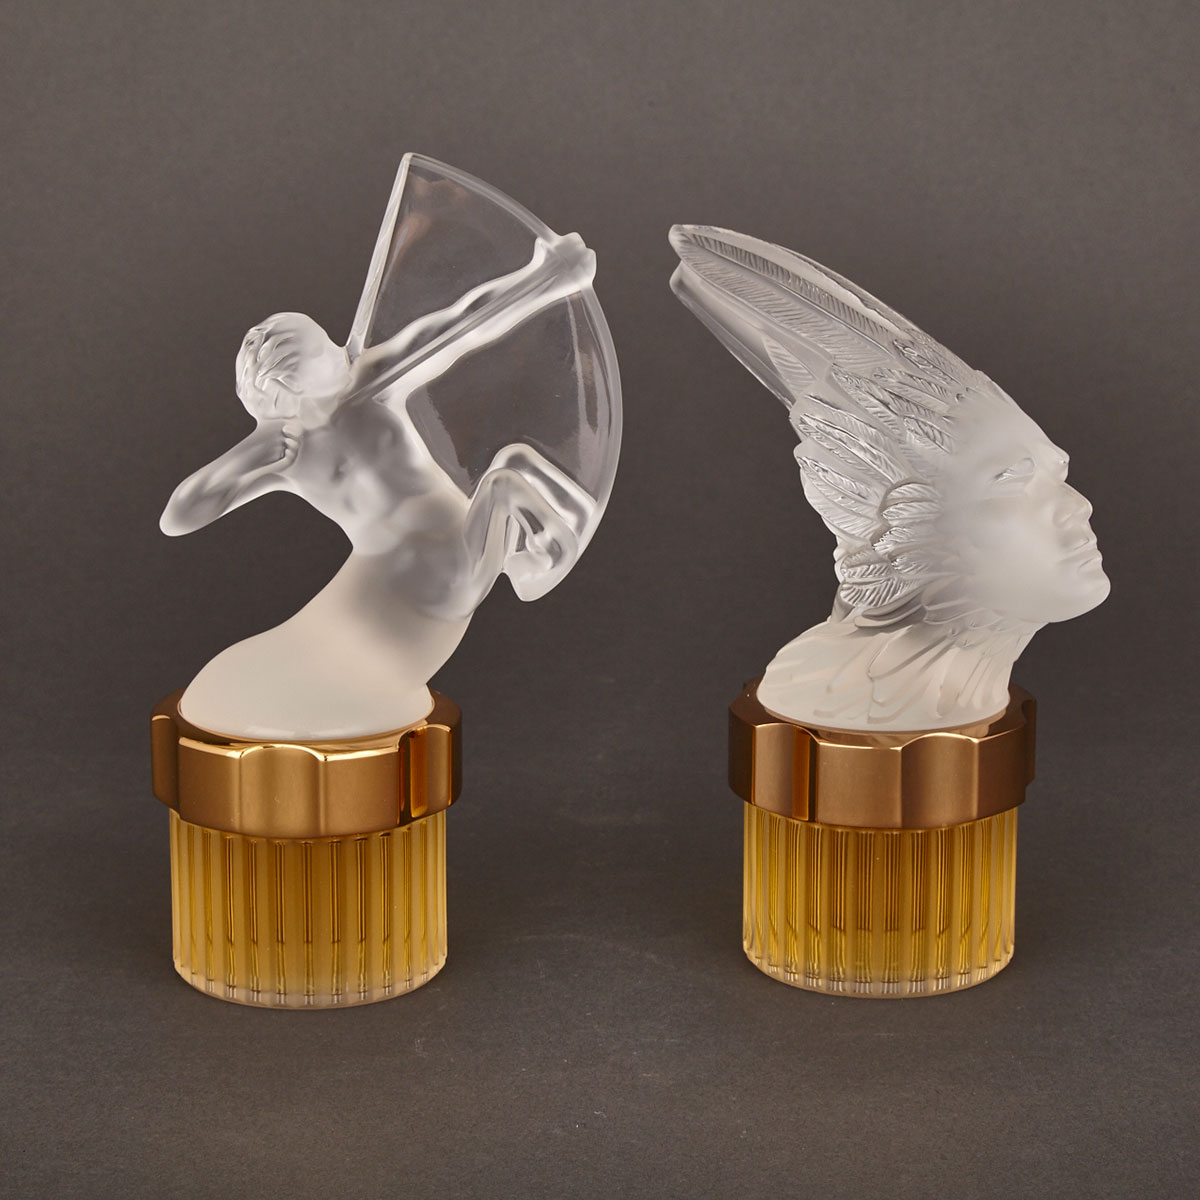 ‘Pour Homme’, Two Lalique Fragrance Flacons, 1999 and 2000